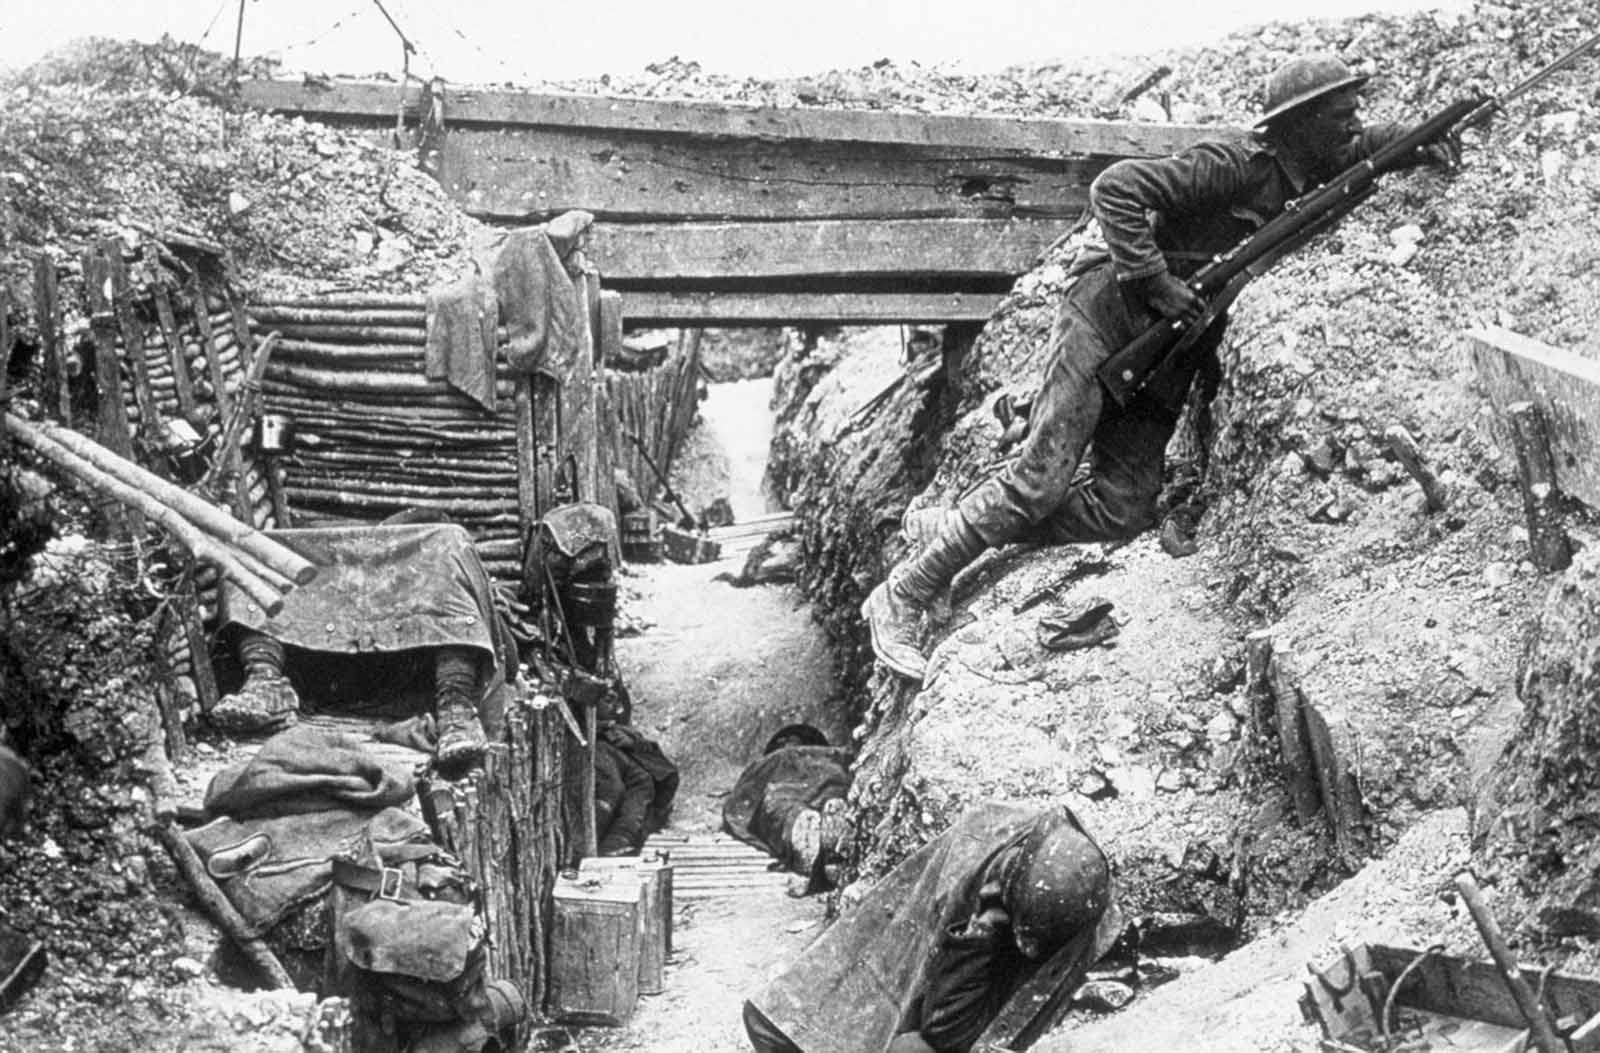 The British trenches, manned by the 11th battalion, The Cheshire Regiment, near La Boisselle.